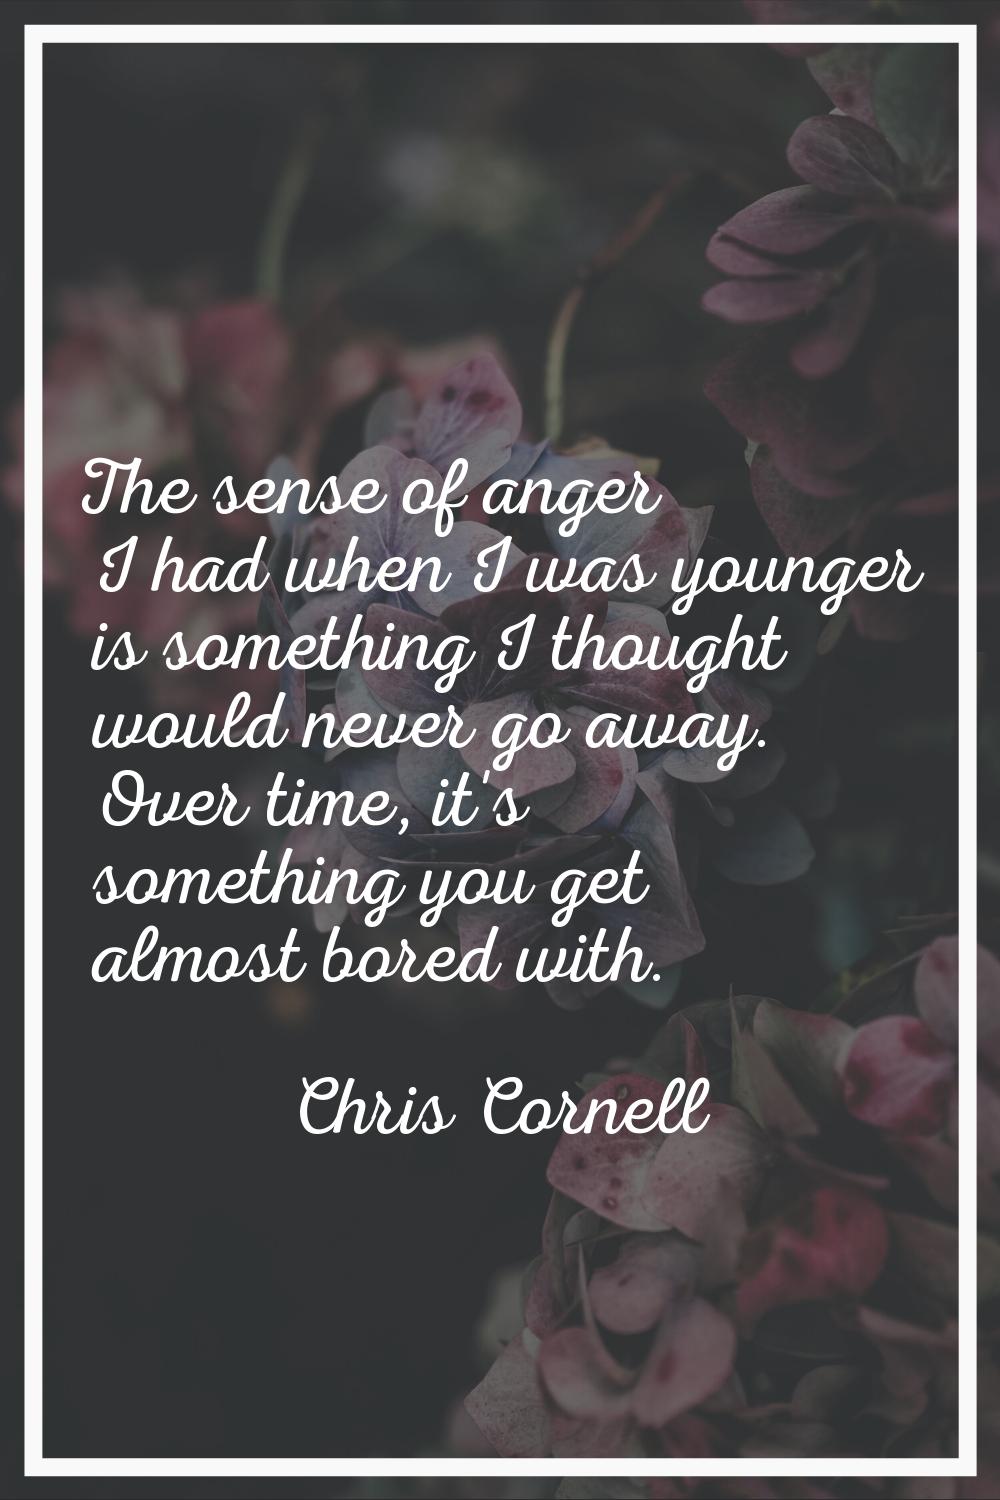 The sense of anger I had when I was younger is something I thought would never go away. Over time, 